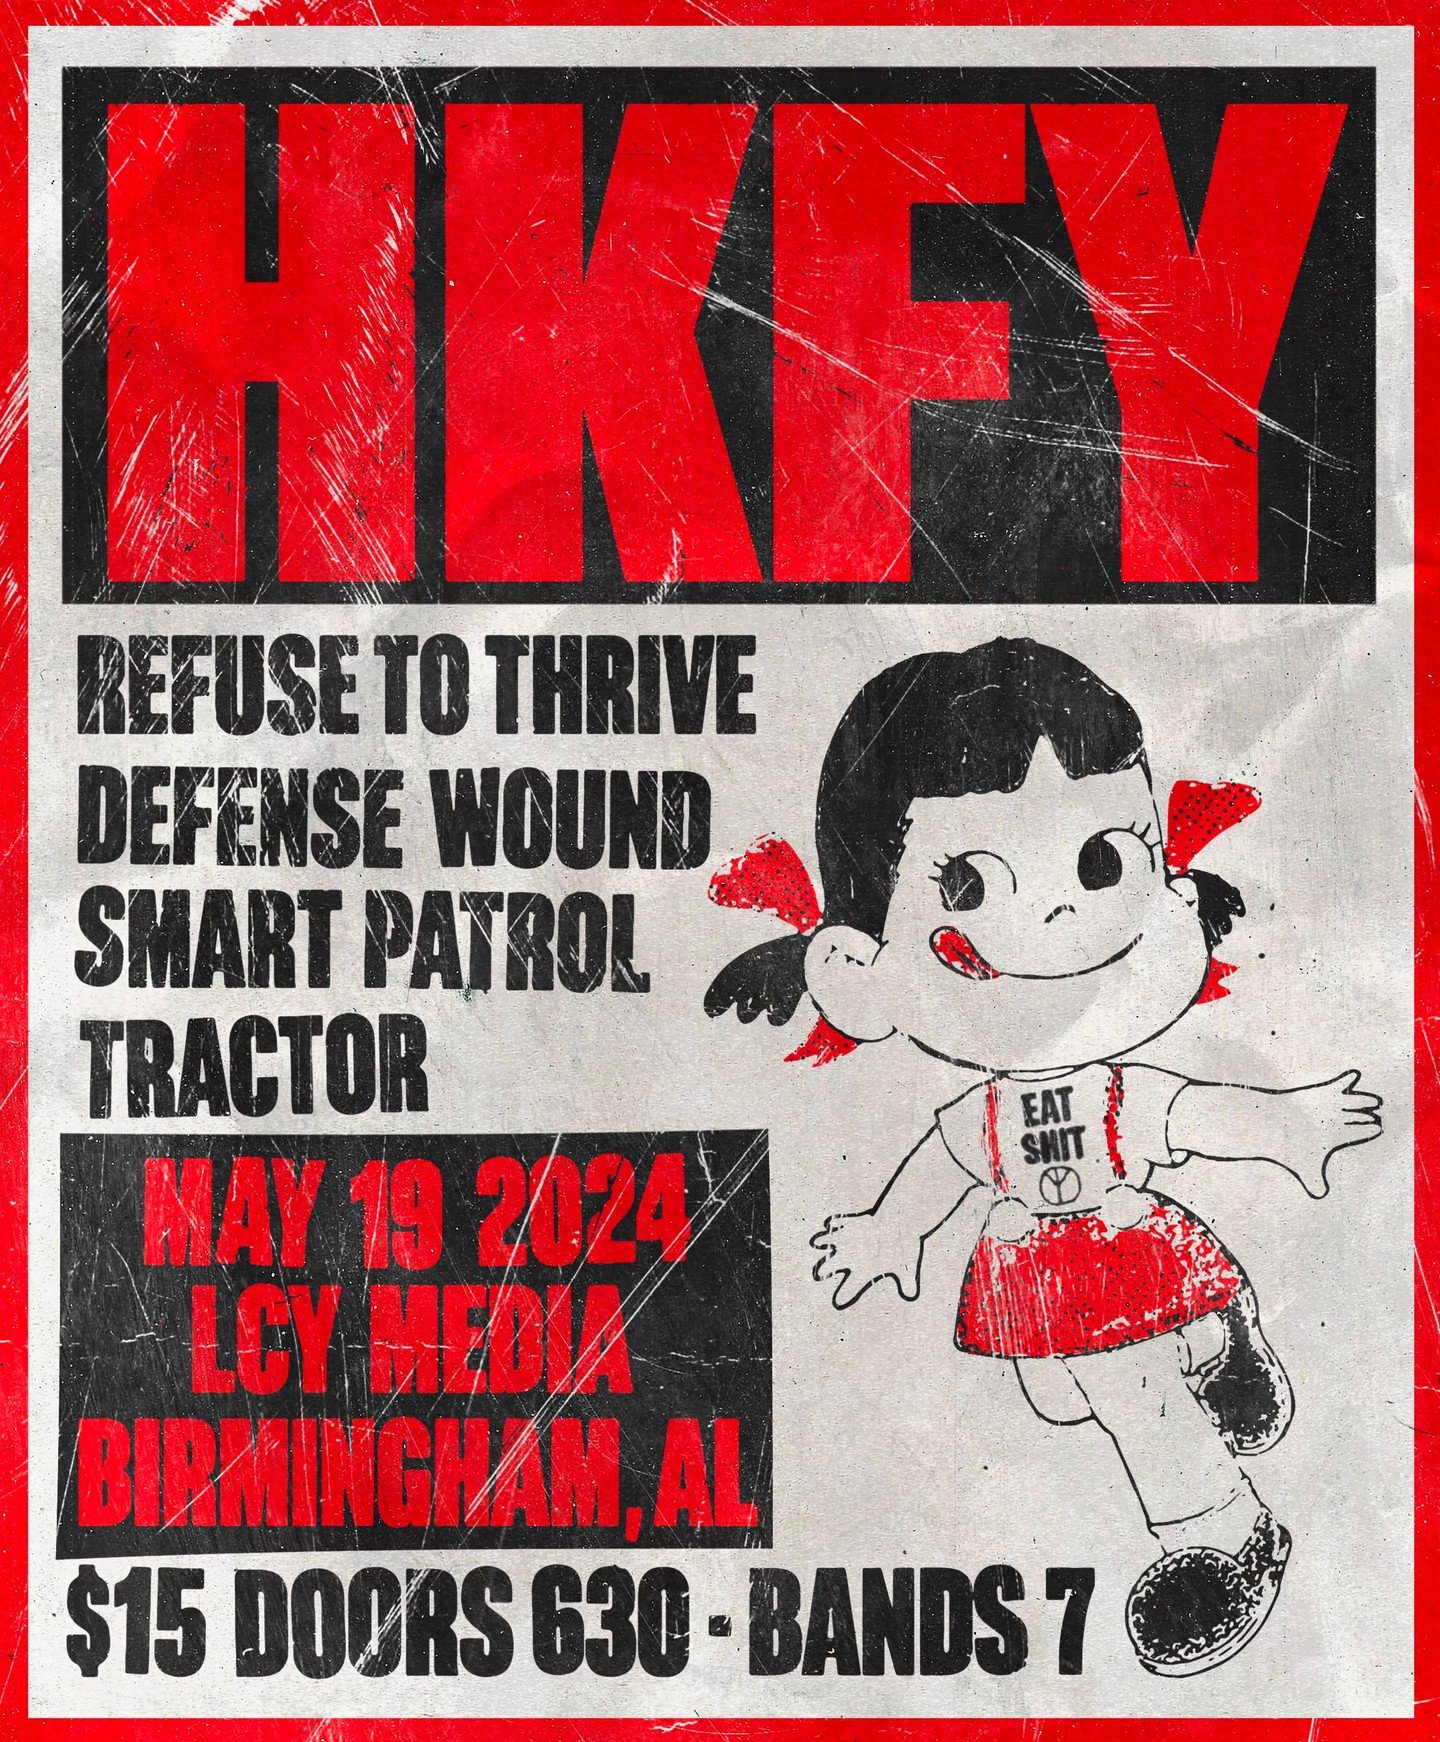 On tour from Tijuana, @hongkongfuckedyou is coming fast for @lawnchairyouth May 19. ⛓️ Birmingham's most deranged will be in tow. Bring a helmet.